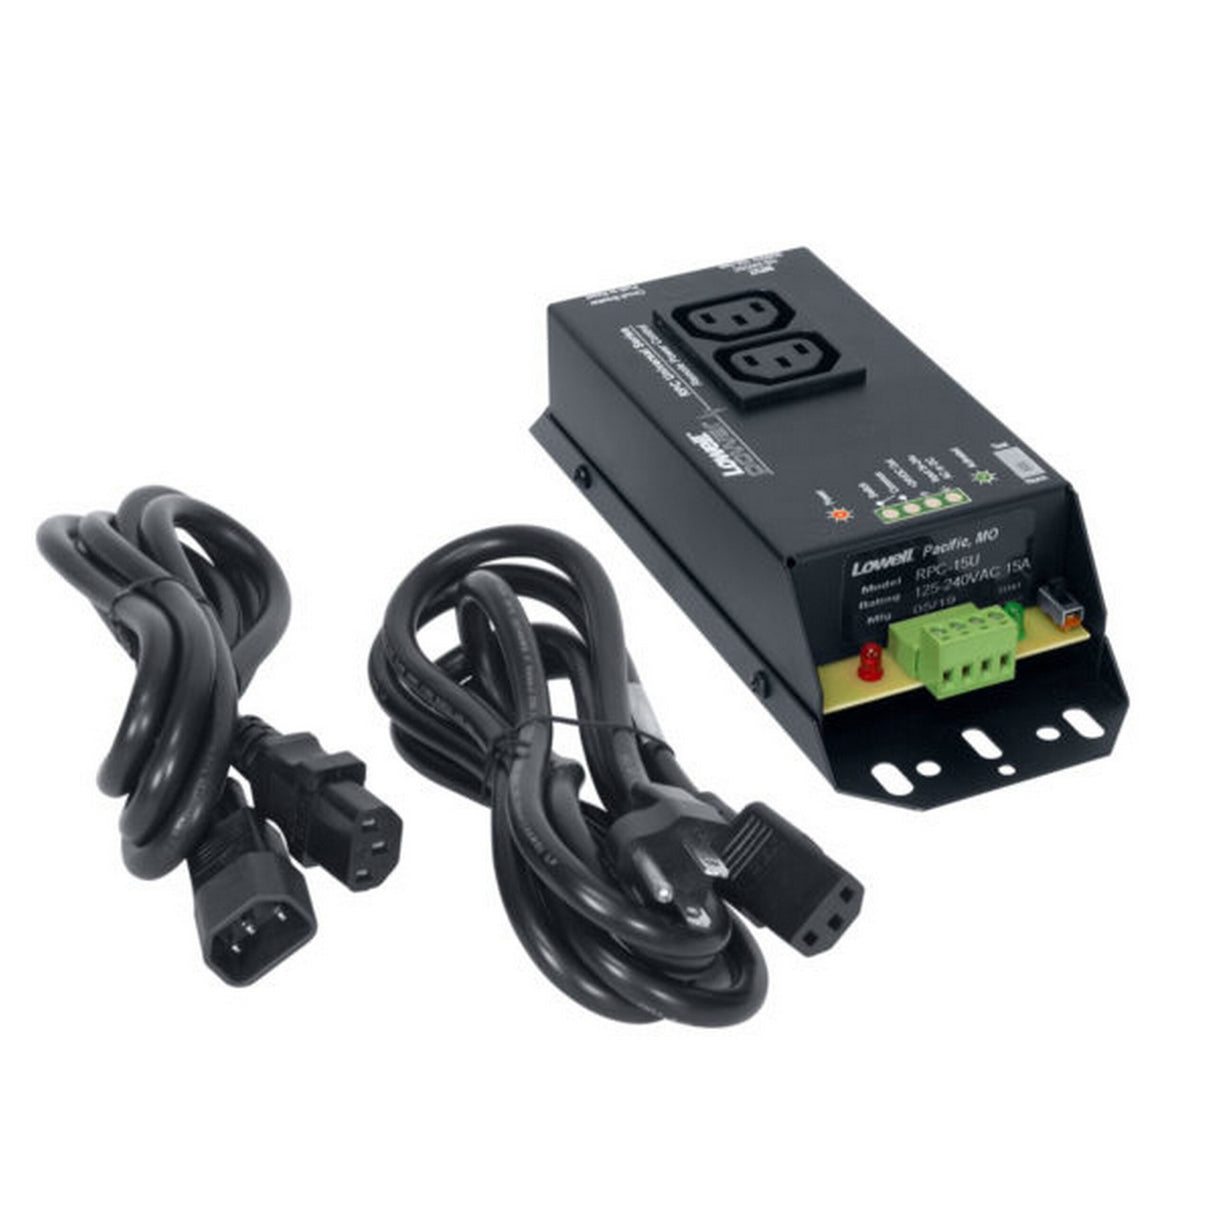 Lowell RPC-15U Classic Remote Power Control, 15A, 1 IEC C13 Duplex Outlet, 6-Foot Cord